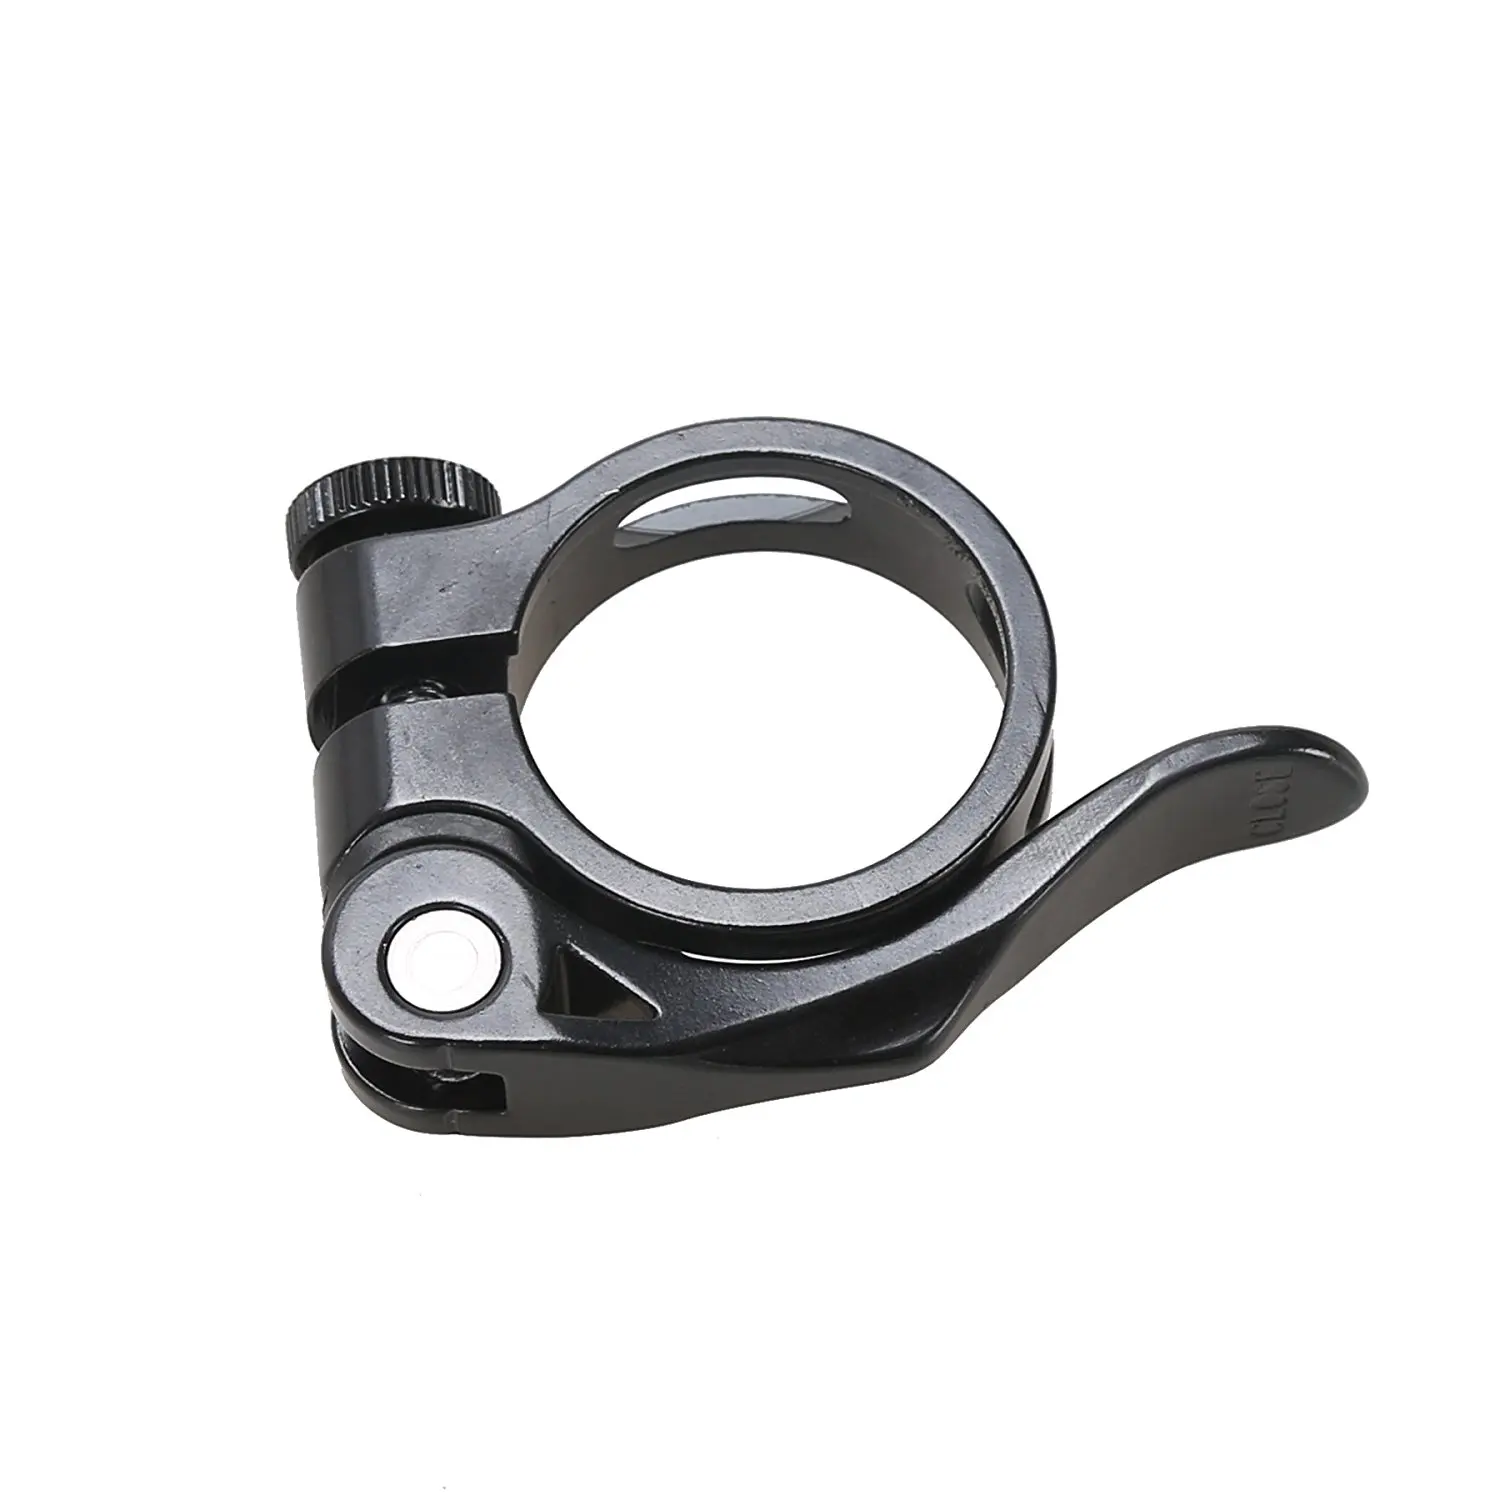 specialized quick release seatpost clamp